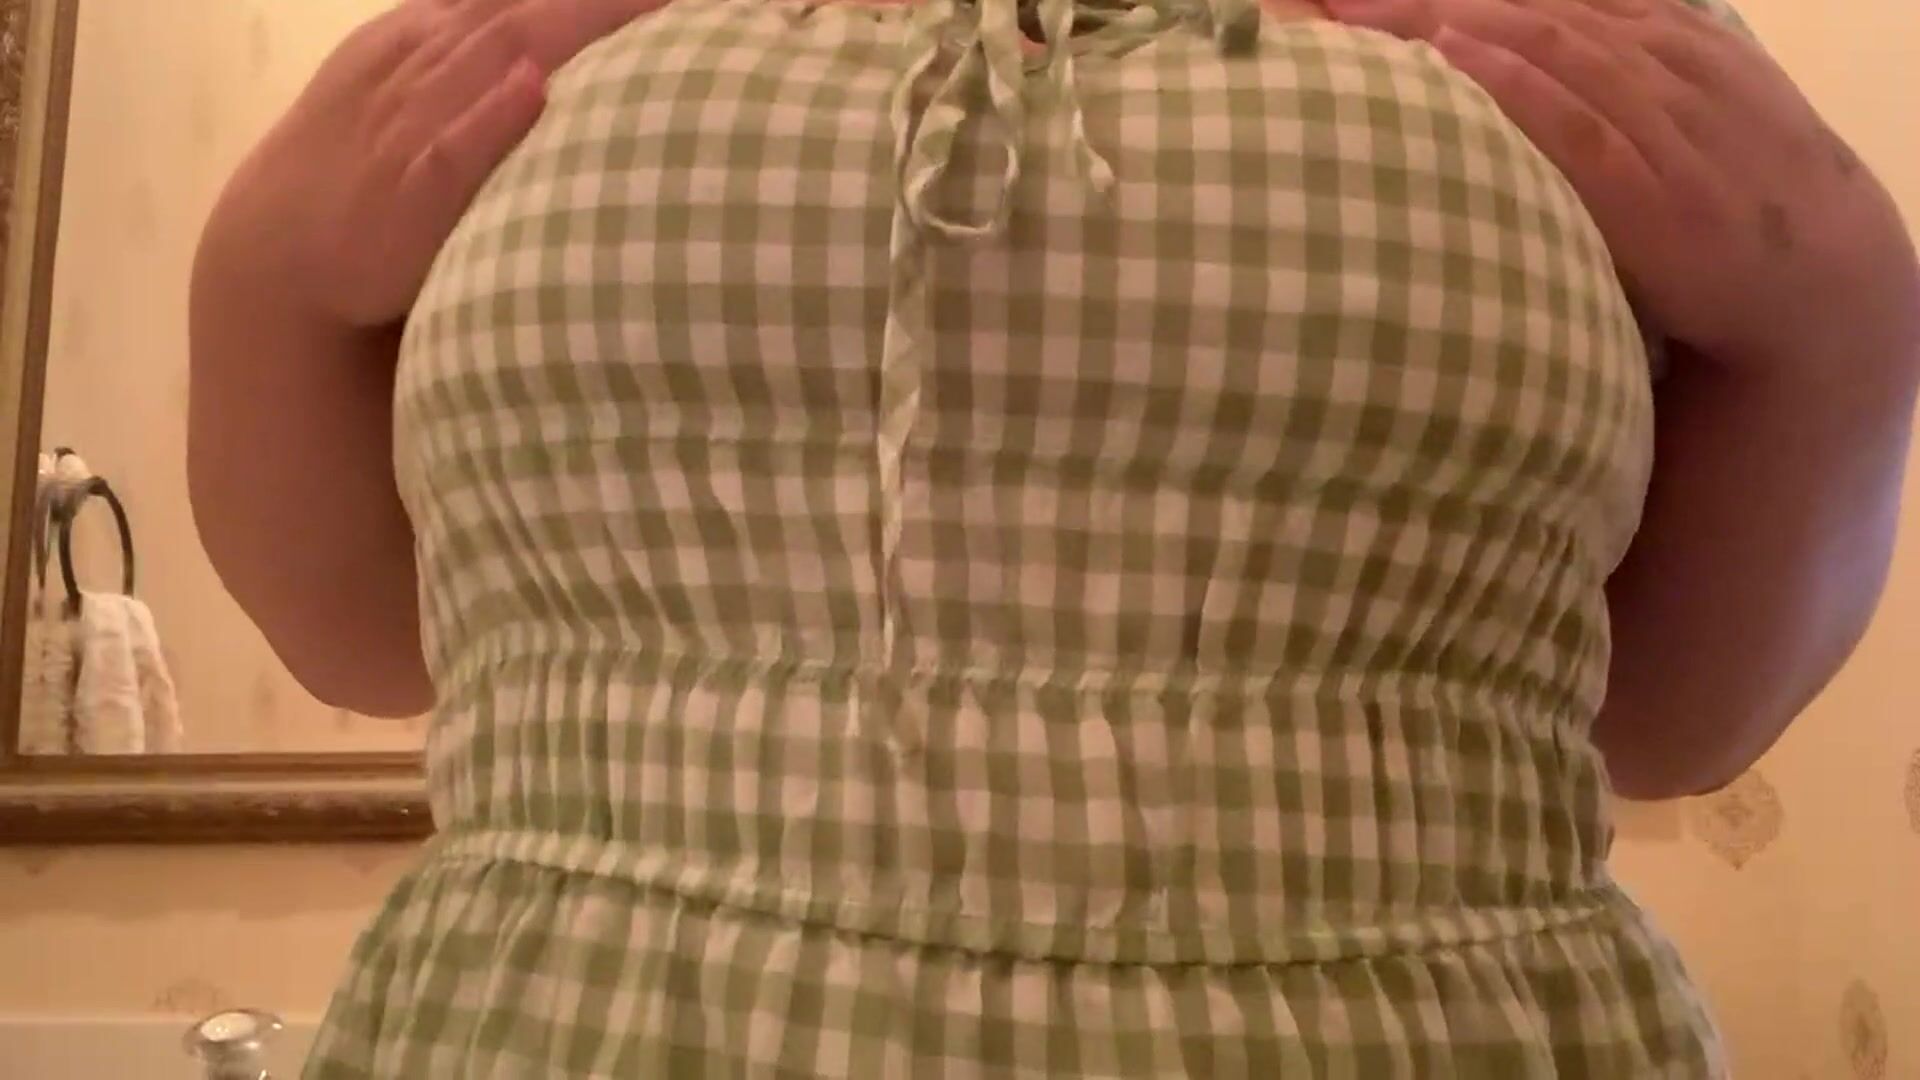 does this dress make my tits look cute ^_^?